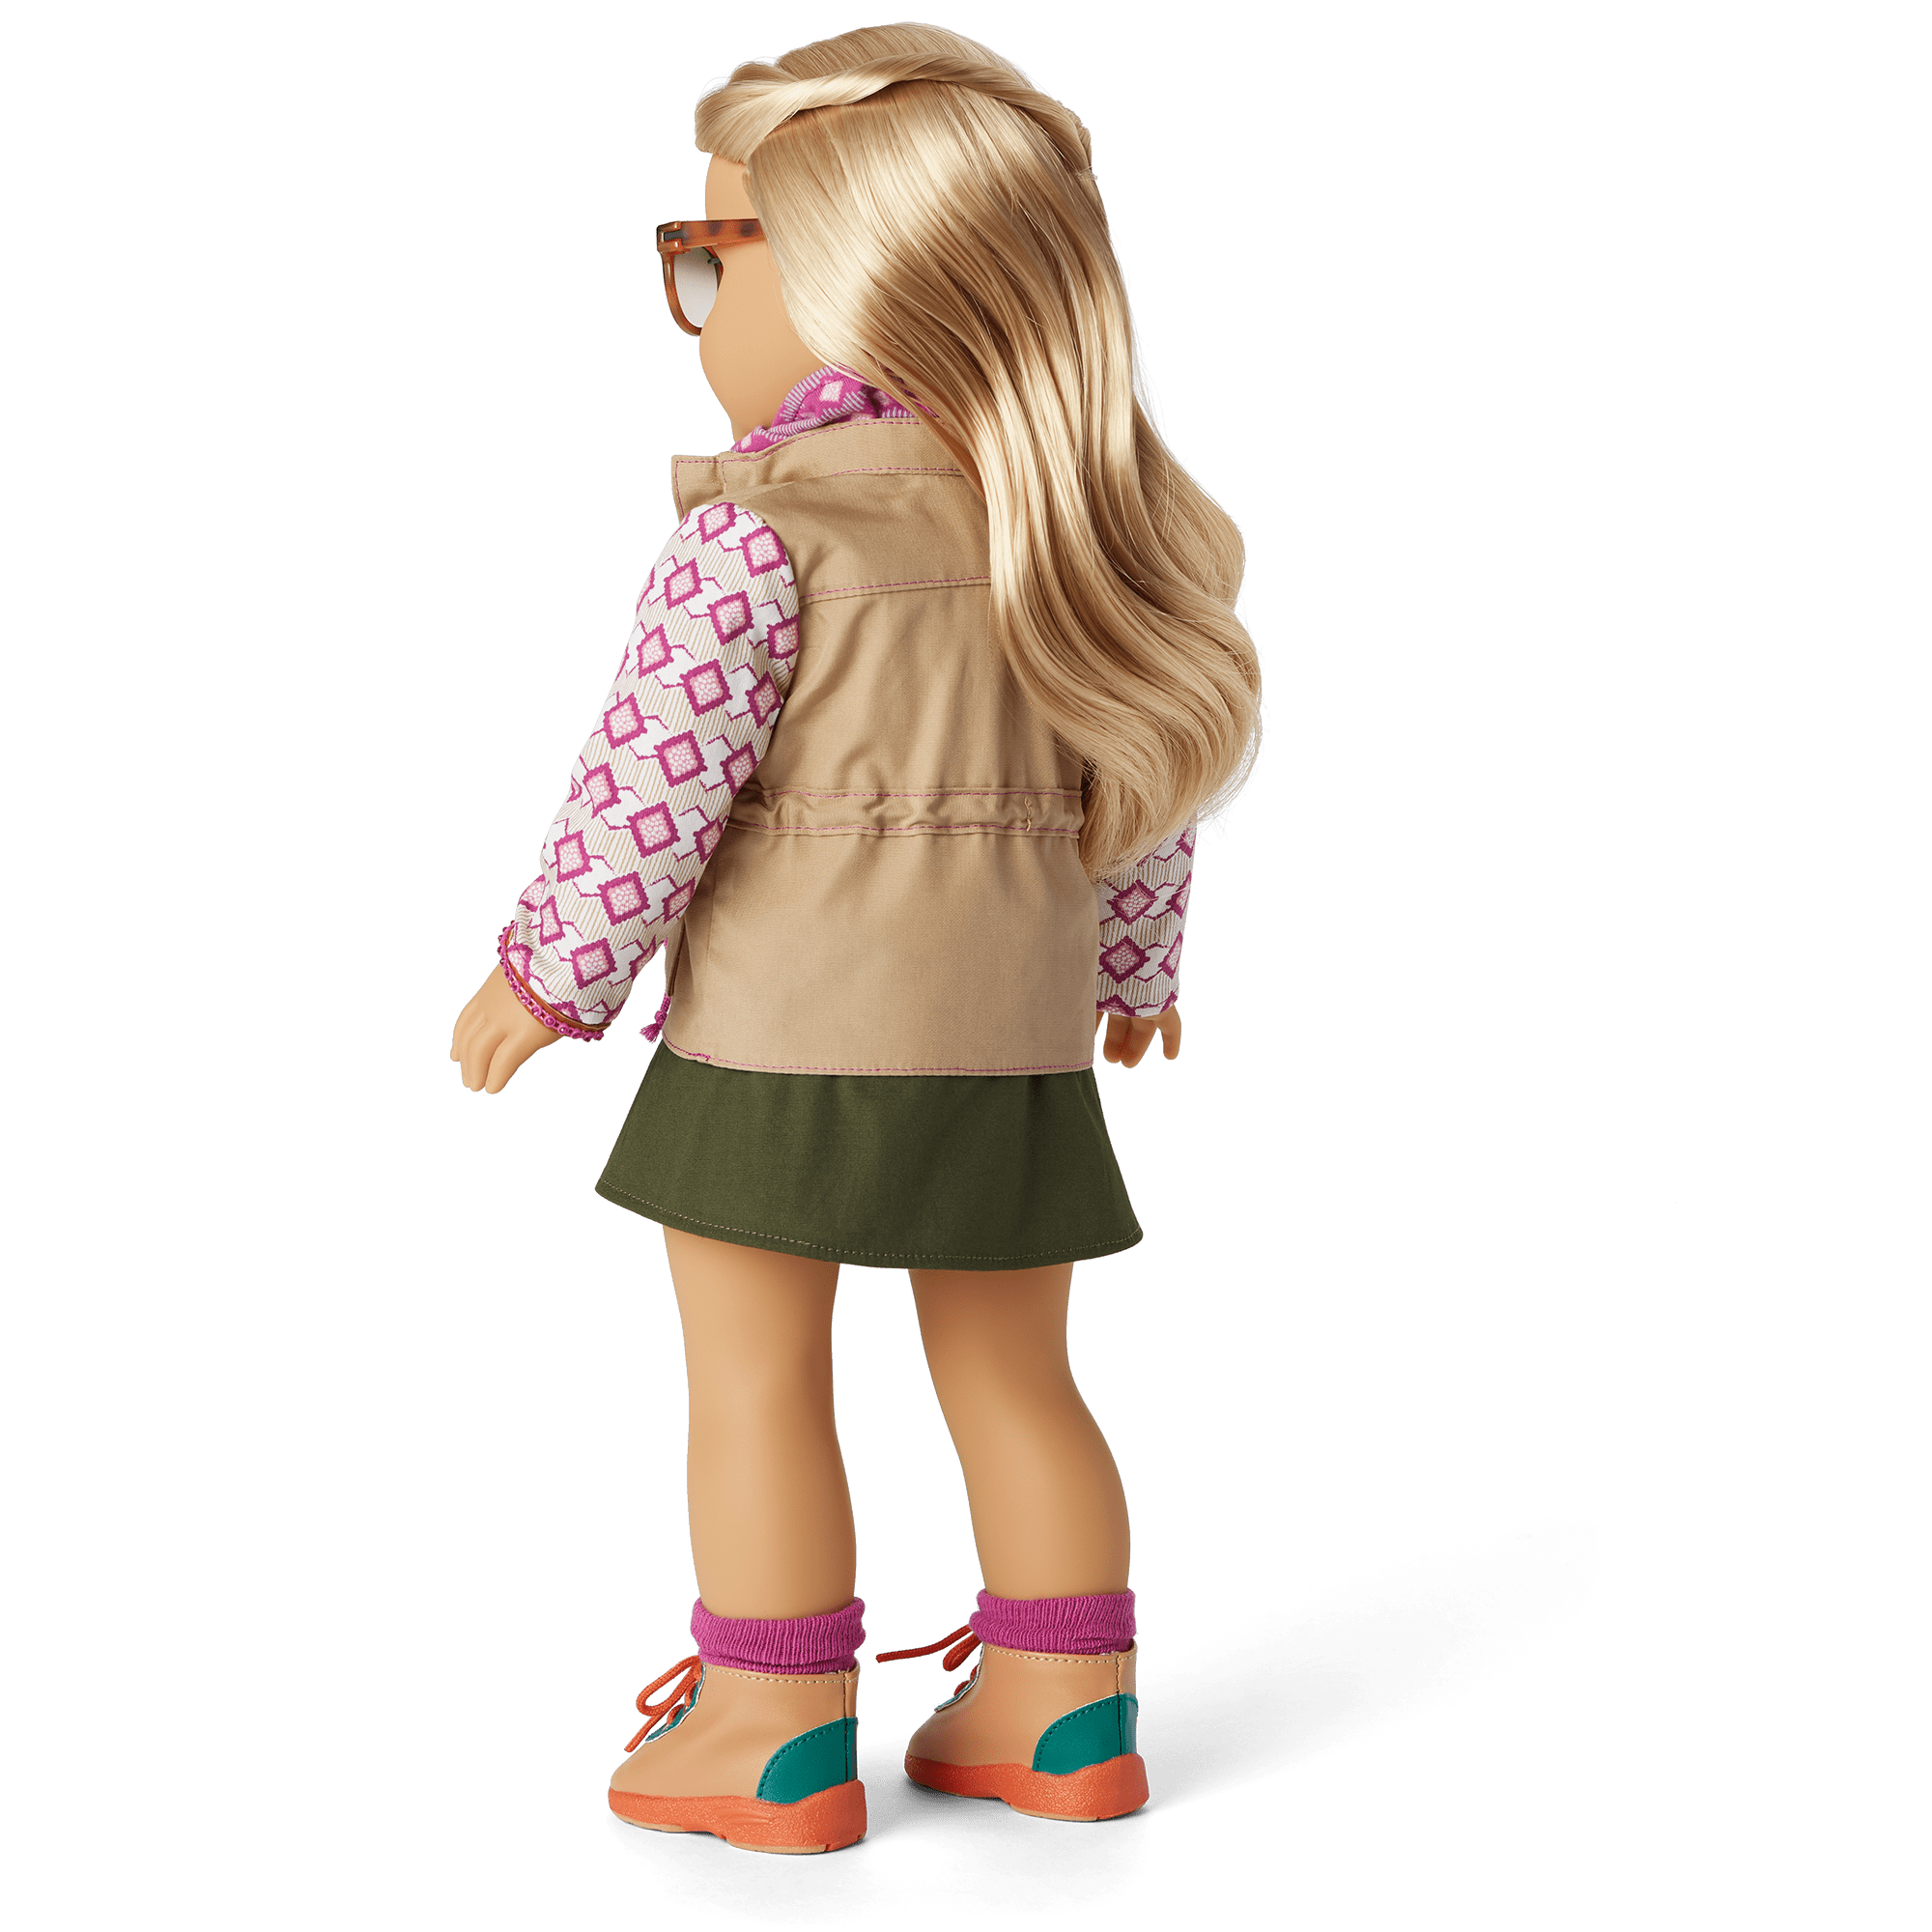 My American Girl Ages 8+ Kira's™ Koala PJs For Girls And 18-inch Dolls Are  Of Low Price, High Quality And Quantity at americangirl Sales Shop